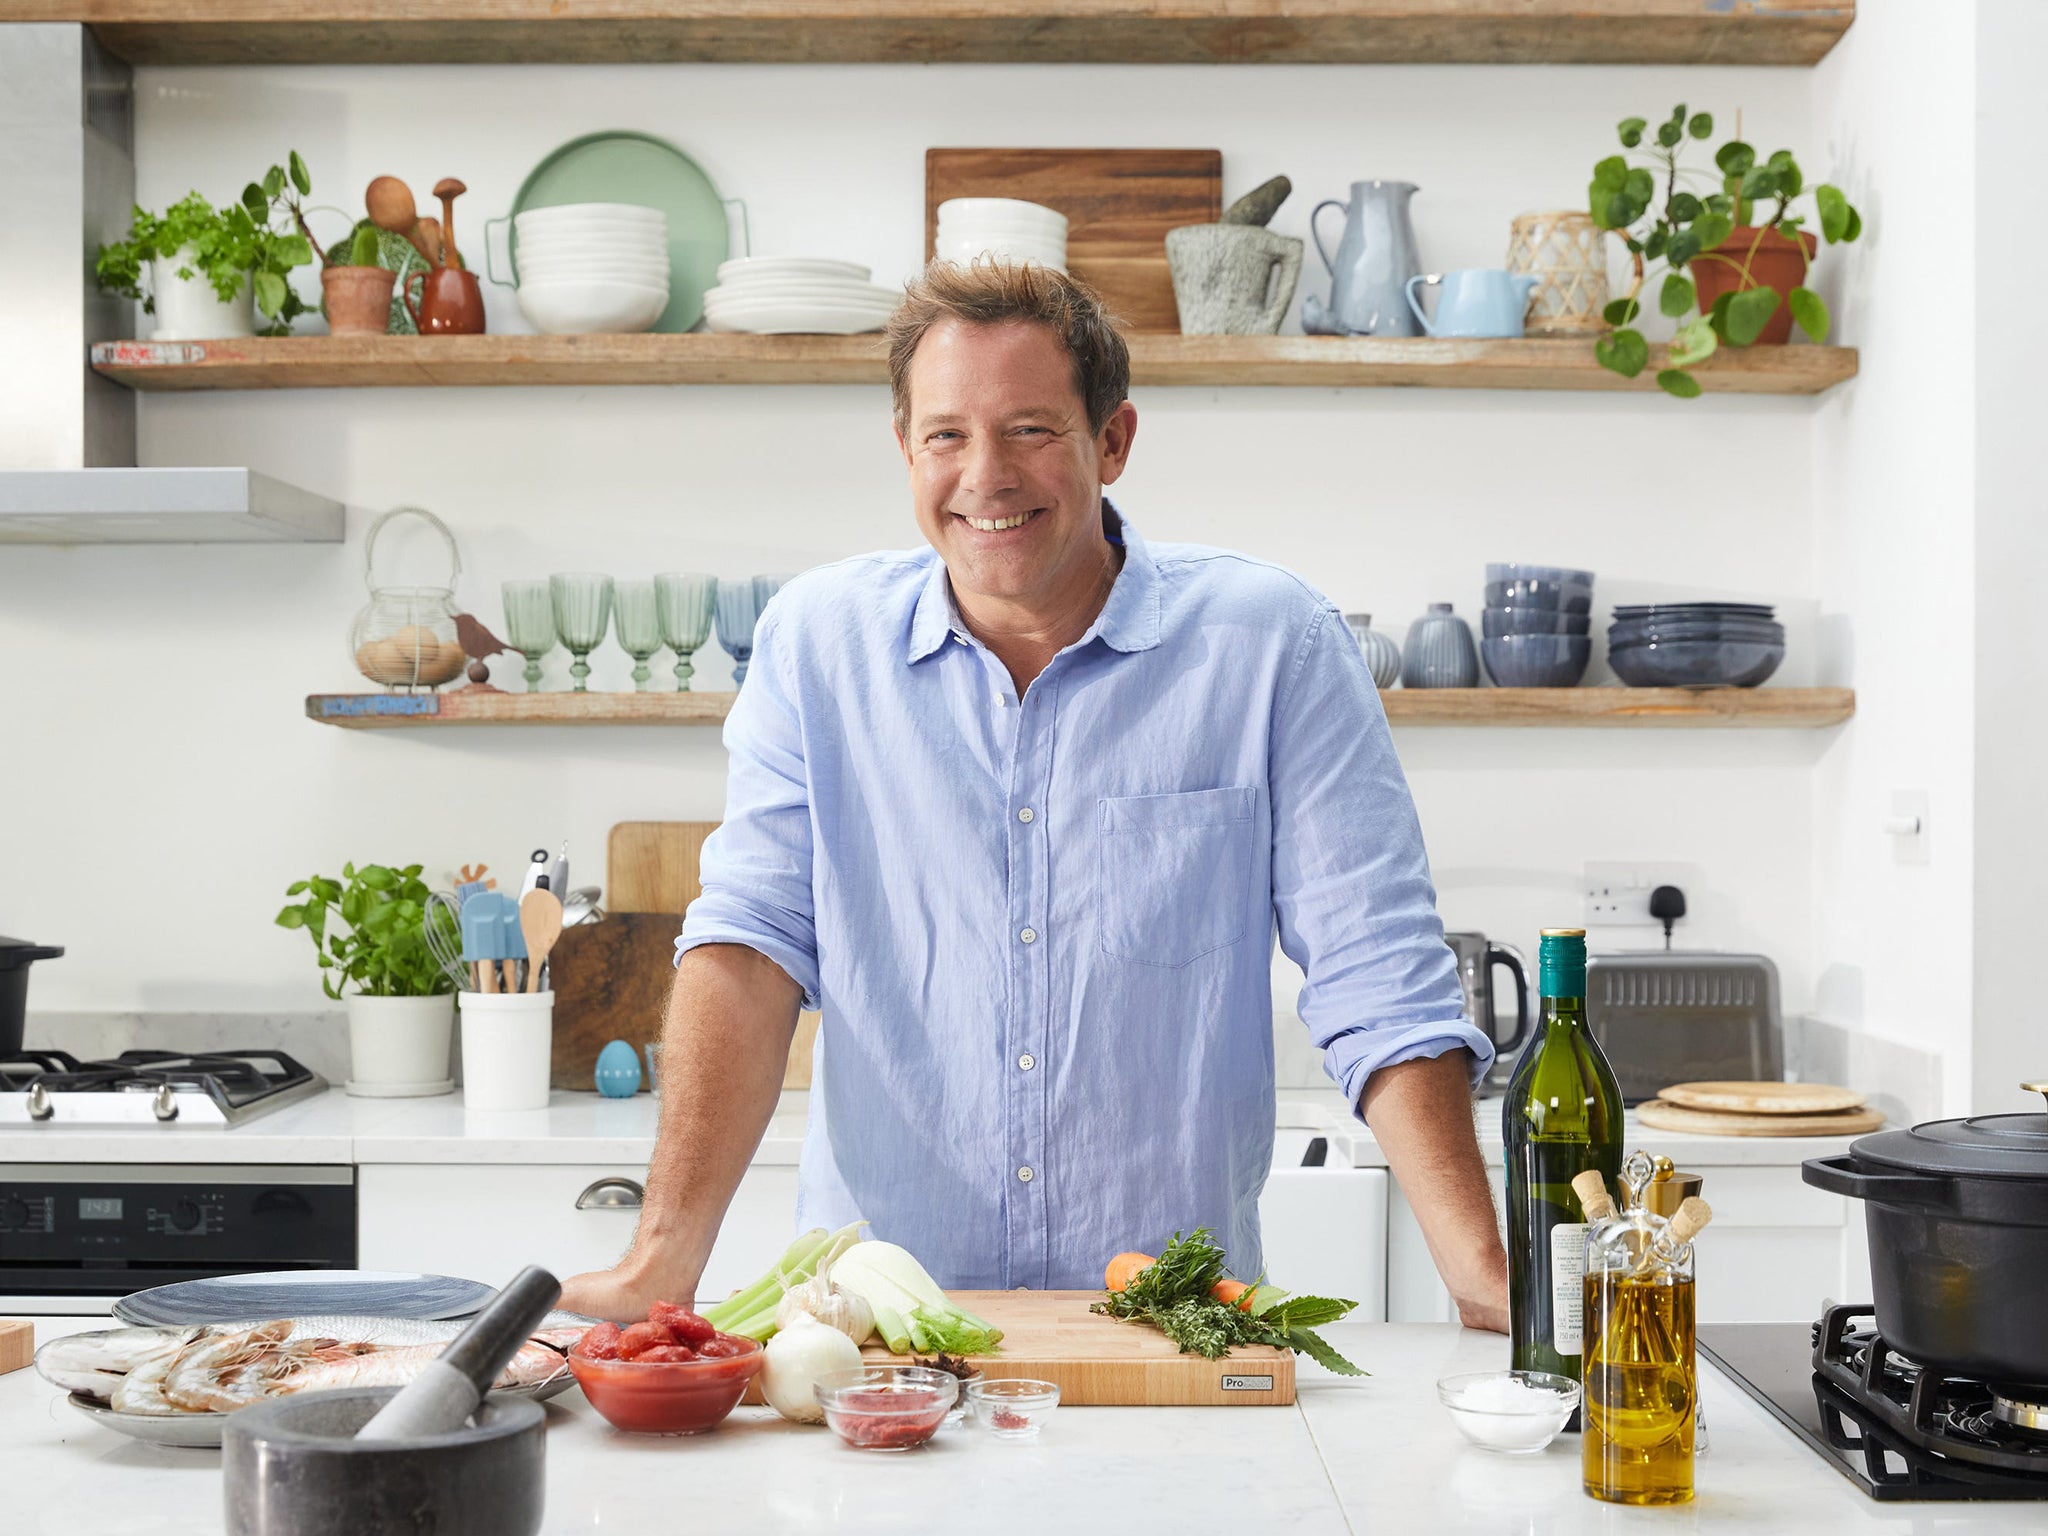 As he approaches 50, Tebbutt has been reflecting on his career as a top chef